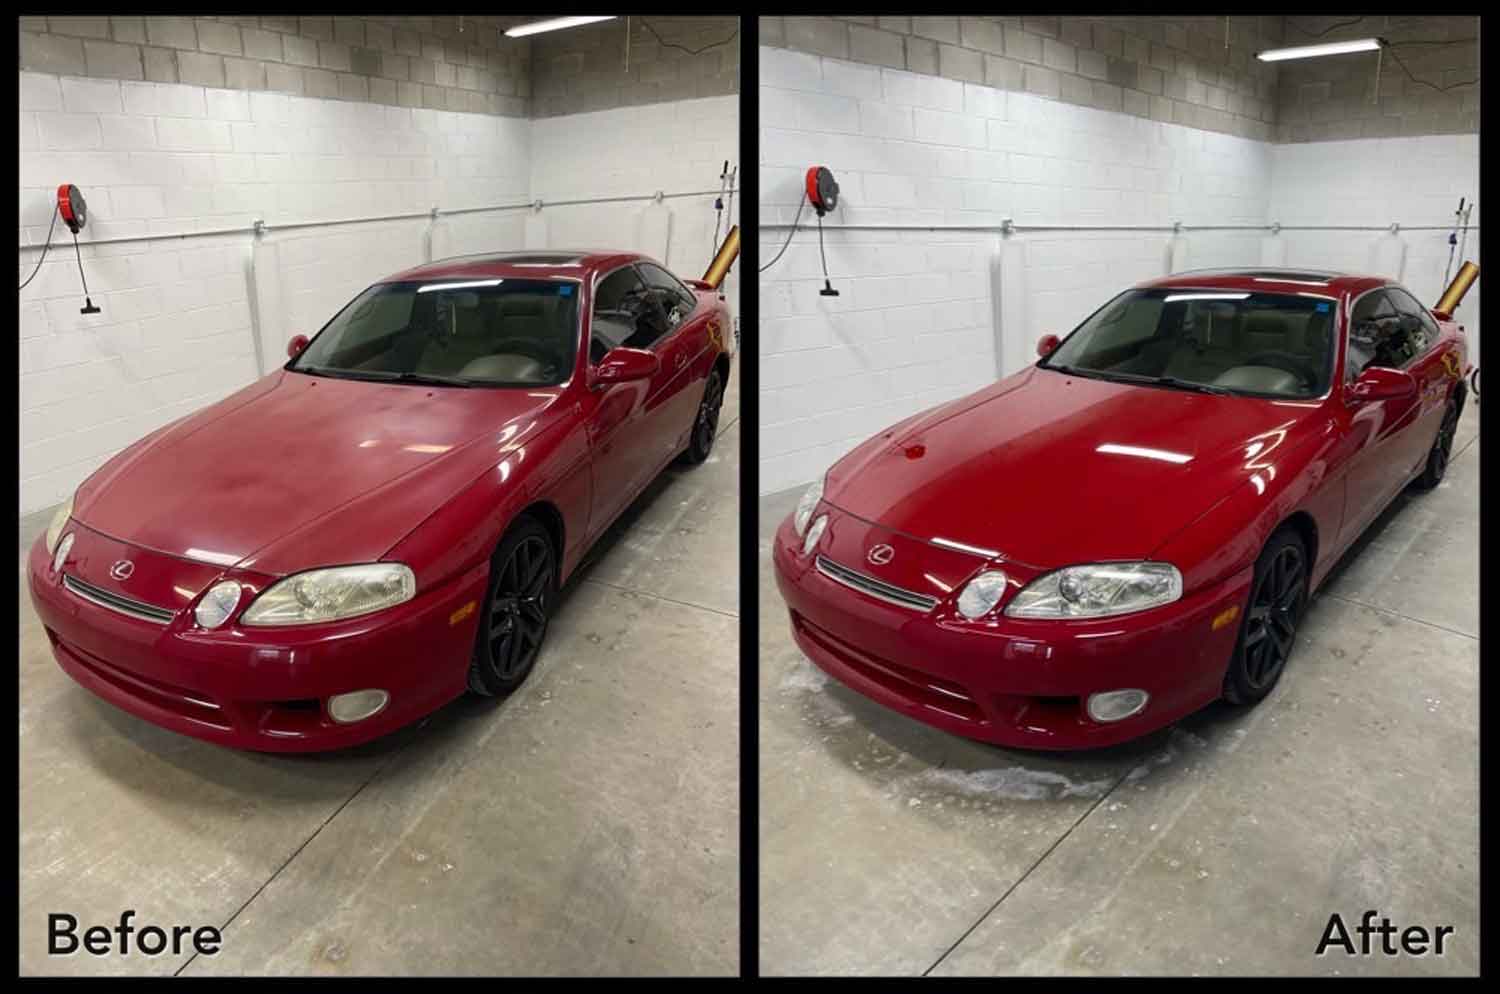 Collage of a red Lexus parked inside with pictures of before and after RestorFX application has been performed